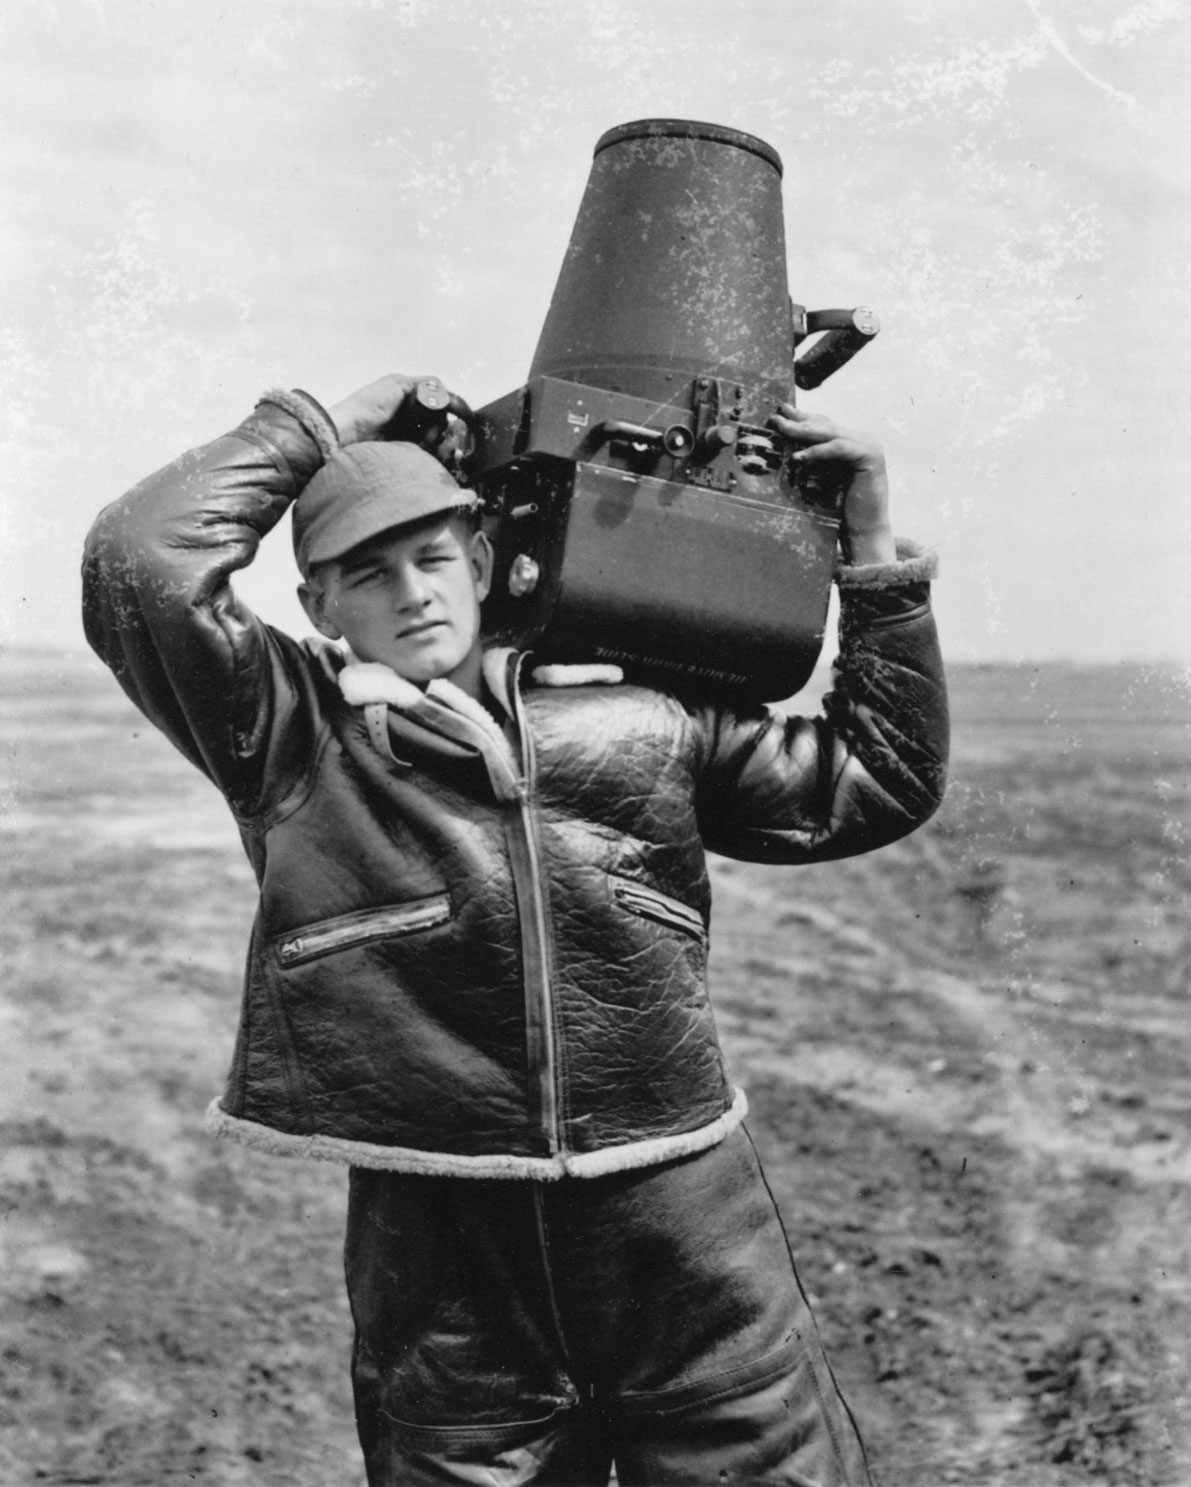 Bill Groethe holds a camera during his time as a photographer for the Army Air Corps in WWII. (Courtesy of Bill Groethe)